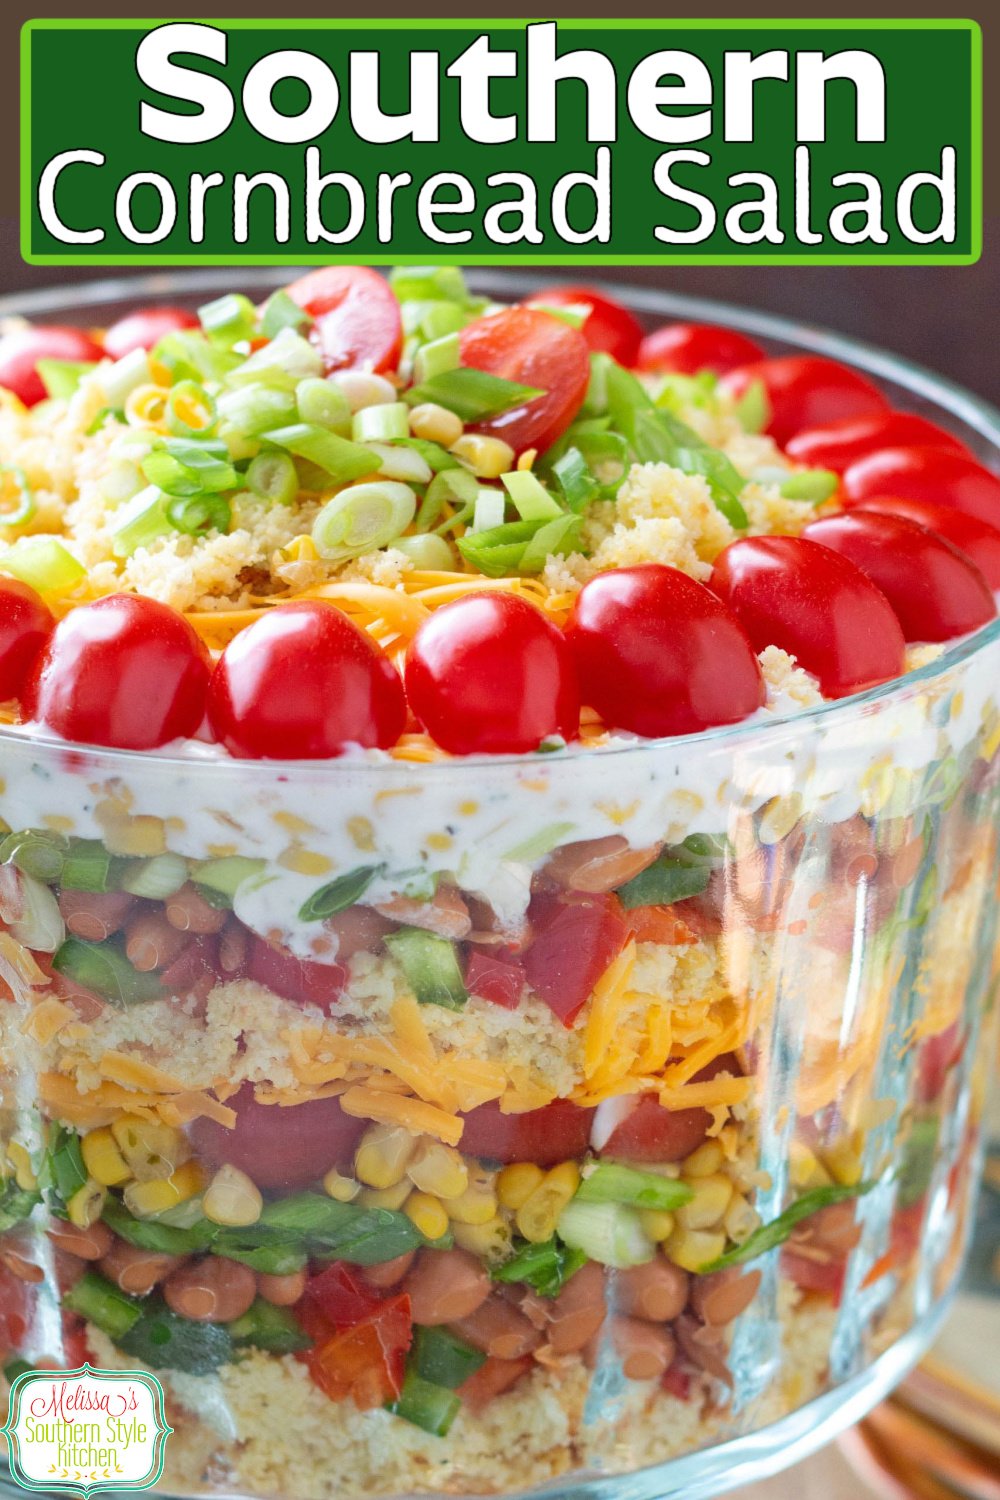 This layered  Southern Cornbread Salad recipe is as flavorful as the colors are vibrant #cornbreadsalad #cornbread #southerncornbreadsalad #saladrecipes #howtomakecornbread #easycornbreadrecipe #cornbreadsaladrecipe via @melissasssk